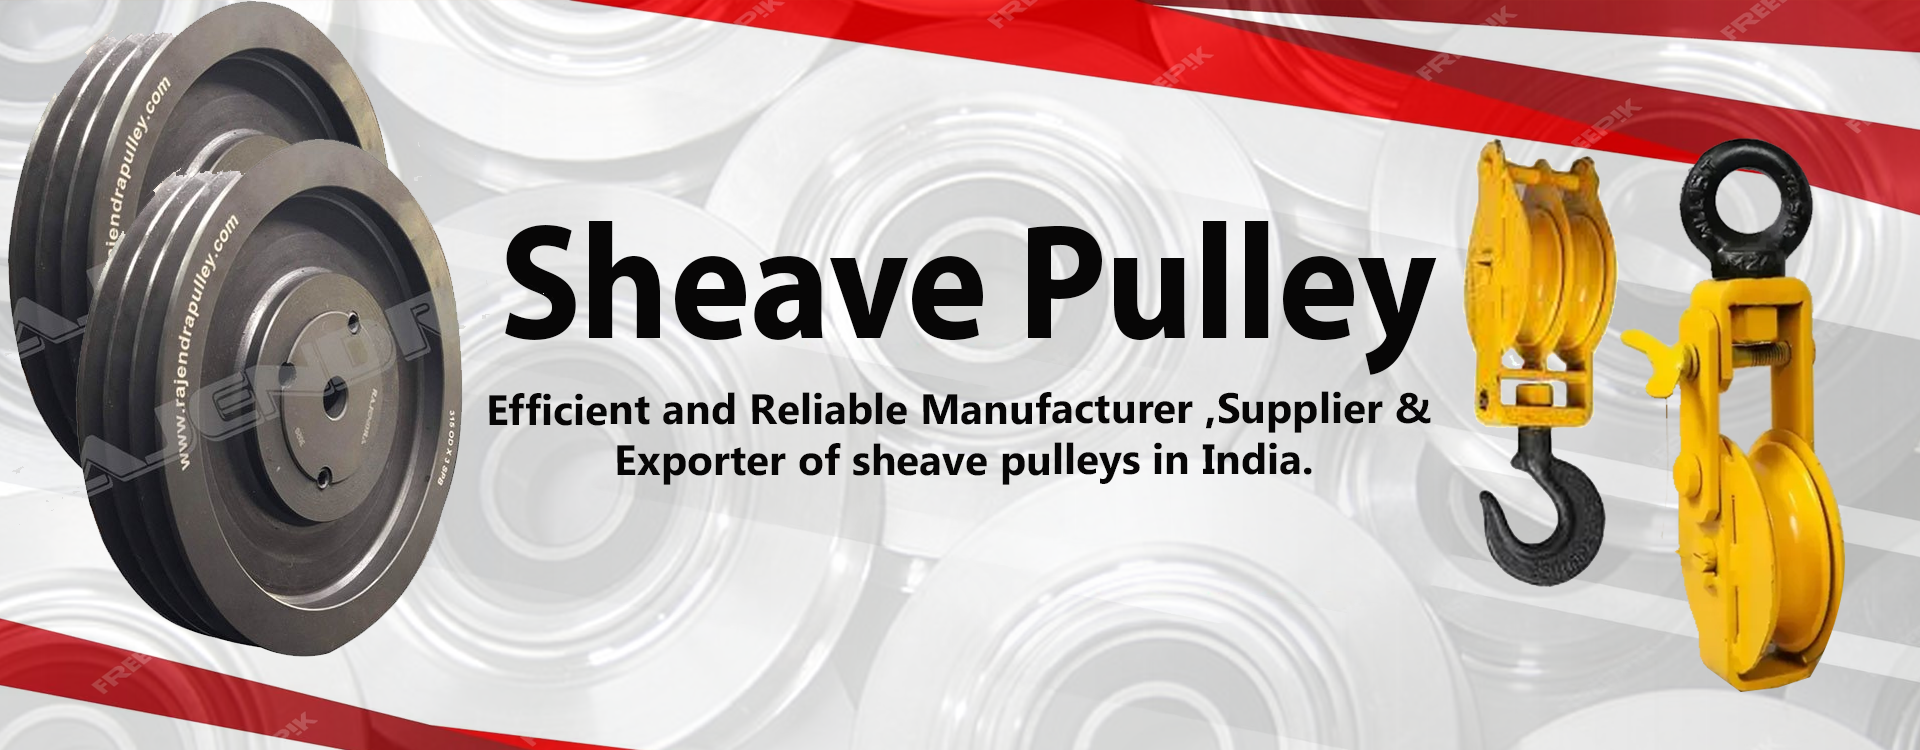 Sheavepulley /Sheave Pulley Manufacturer